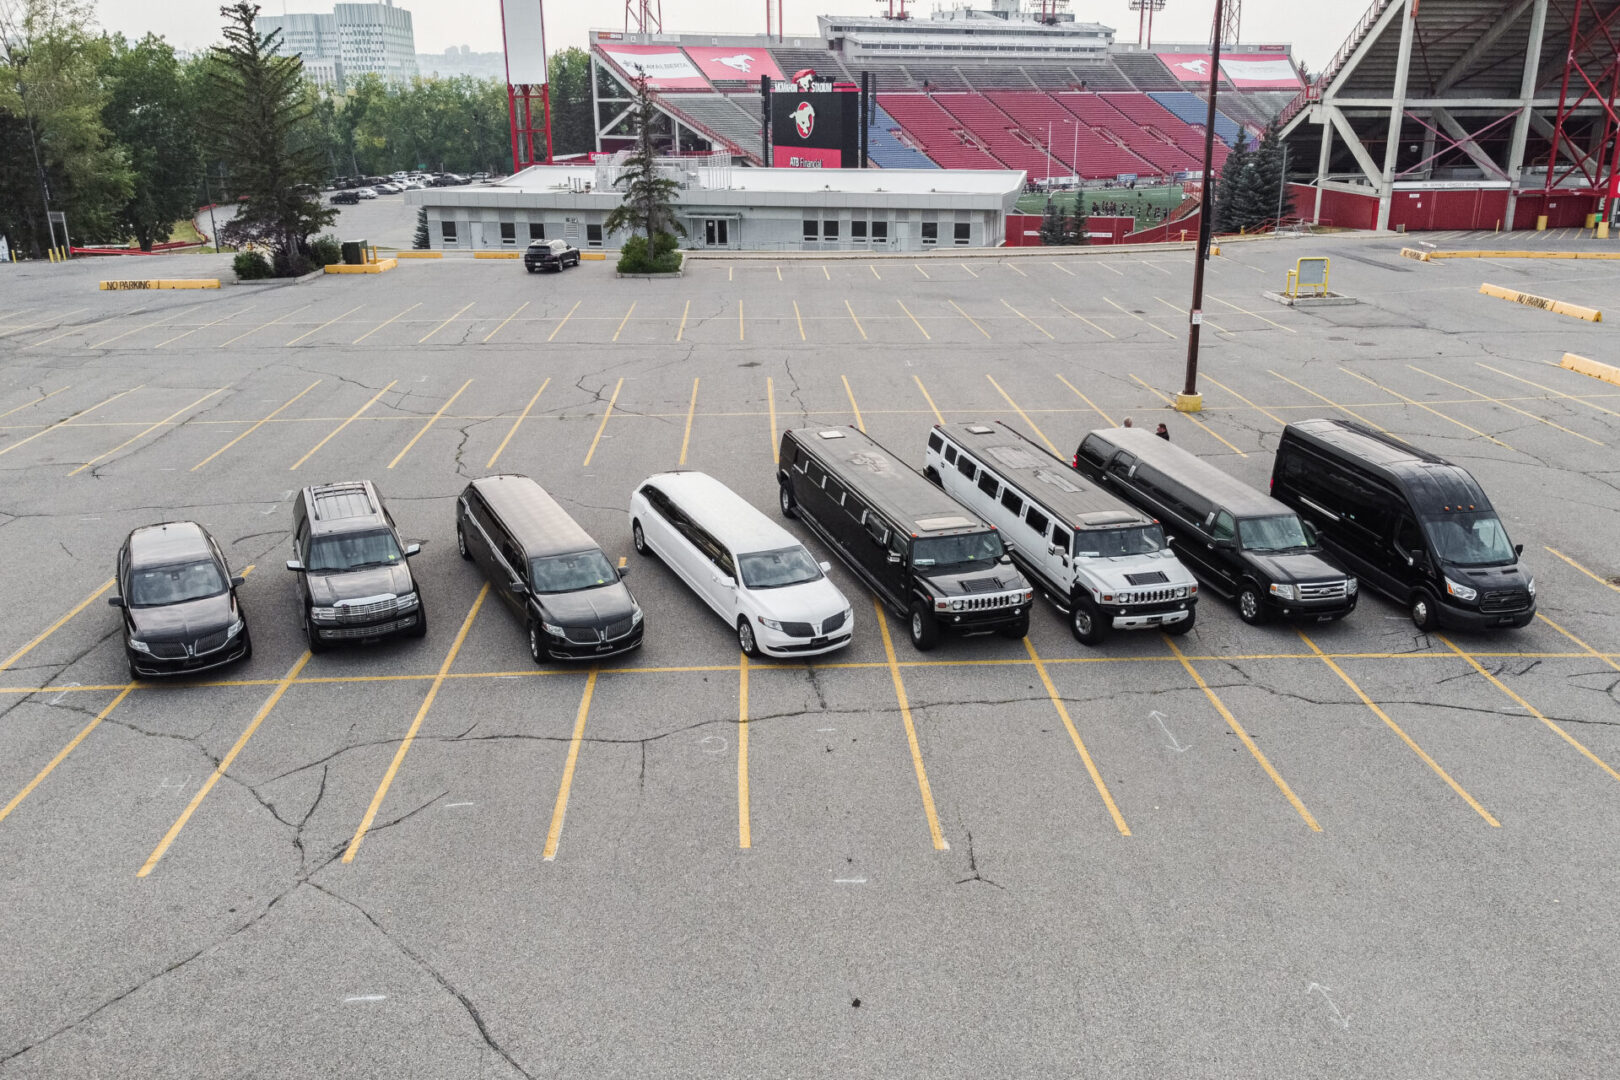 A bunch of cars parked in a lot